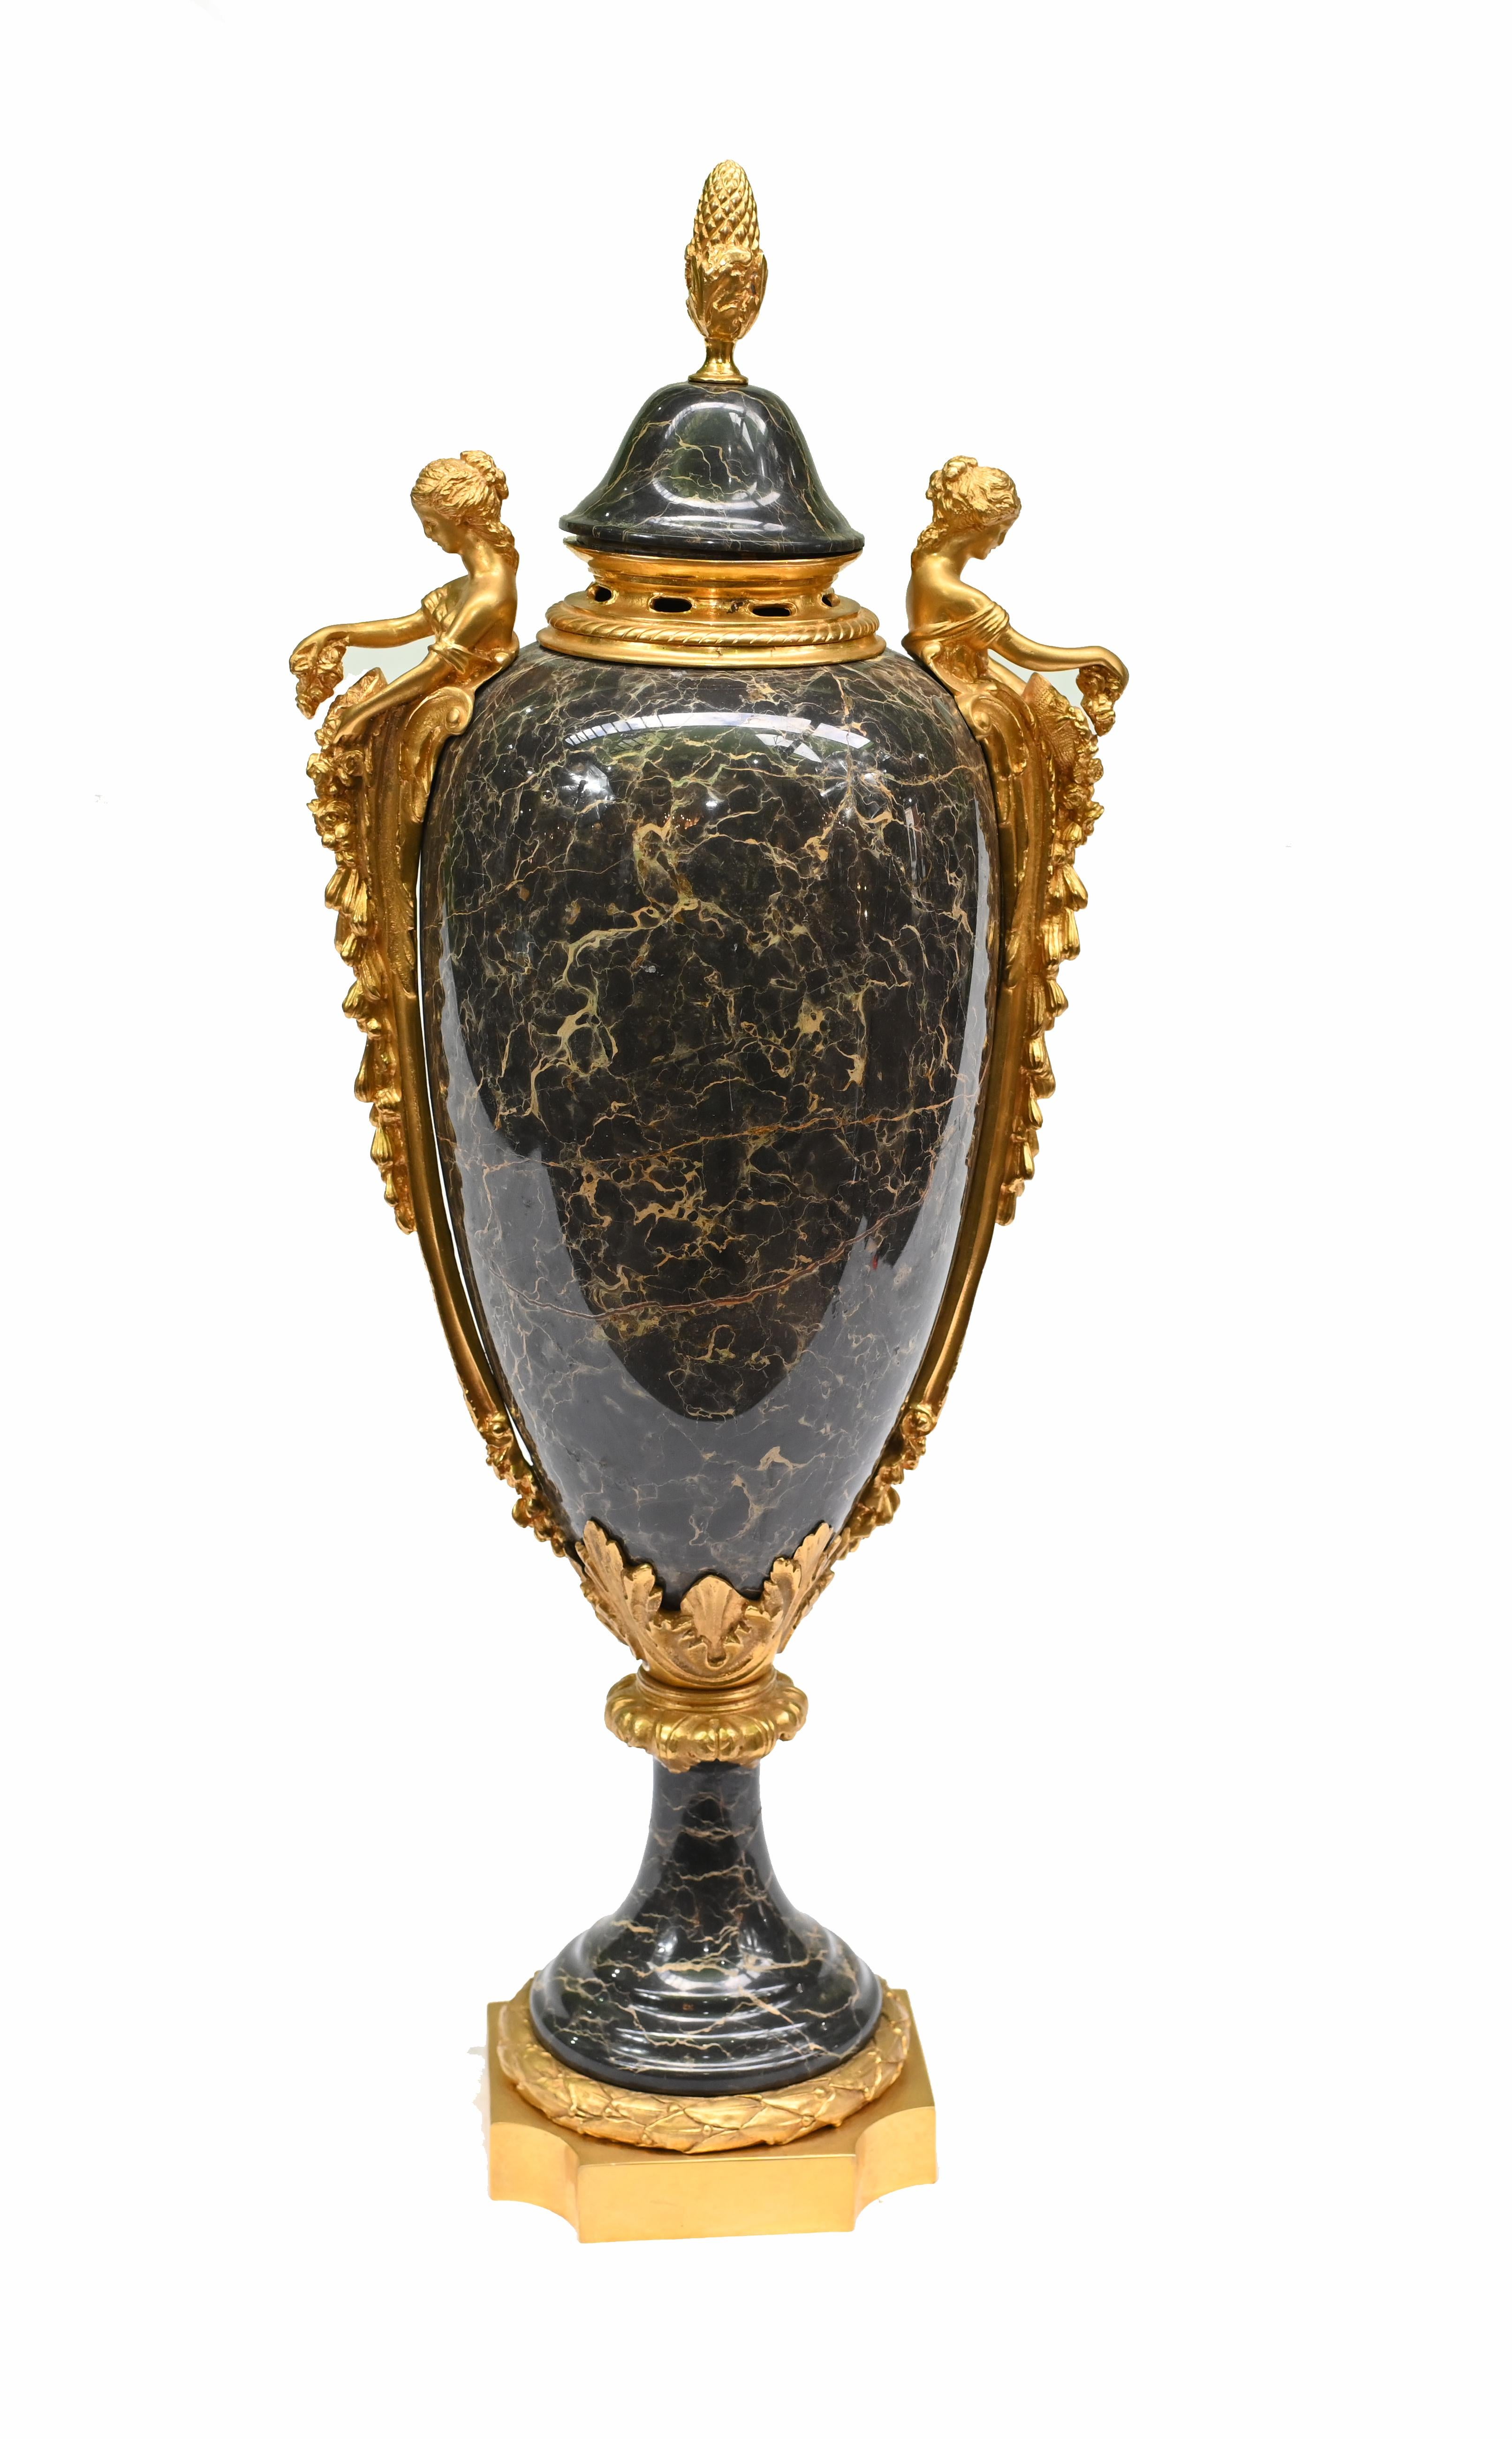 Delightful pair of French marble cassolettes urns
Solid marble with ormolu fixtures including distinctive maiden handles
We date these to circa 1890 and the urns are of a classical amphora form
The stone is black Portoro marble with such a beautiful